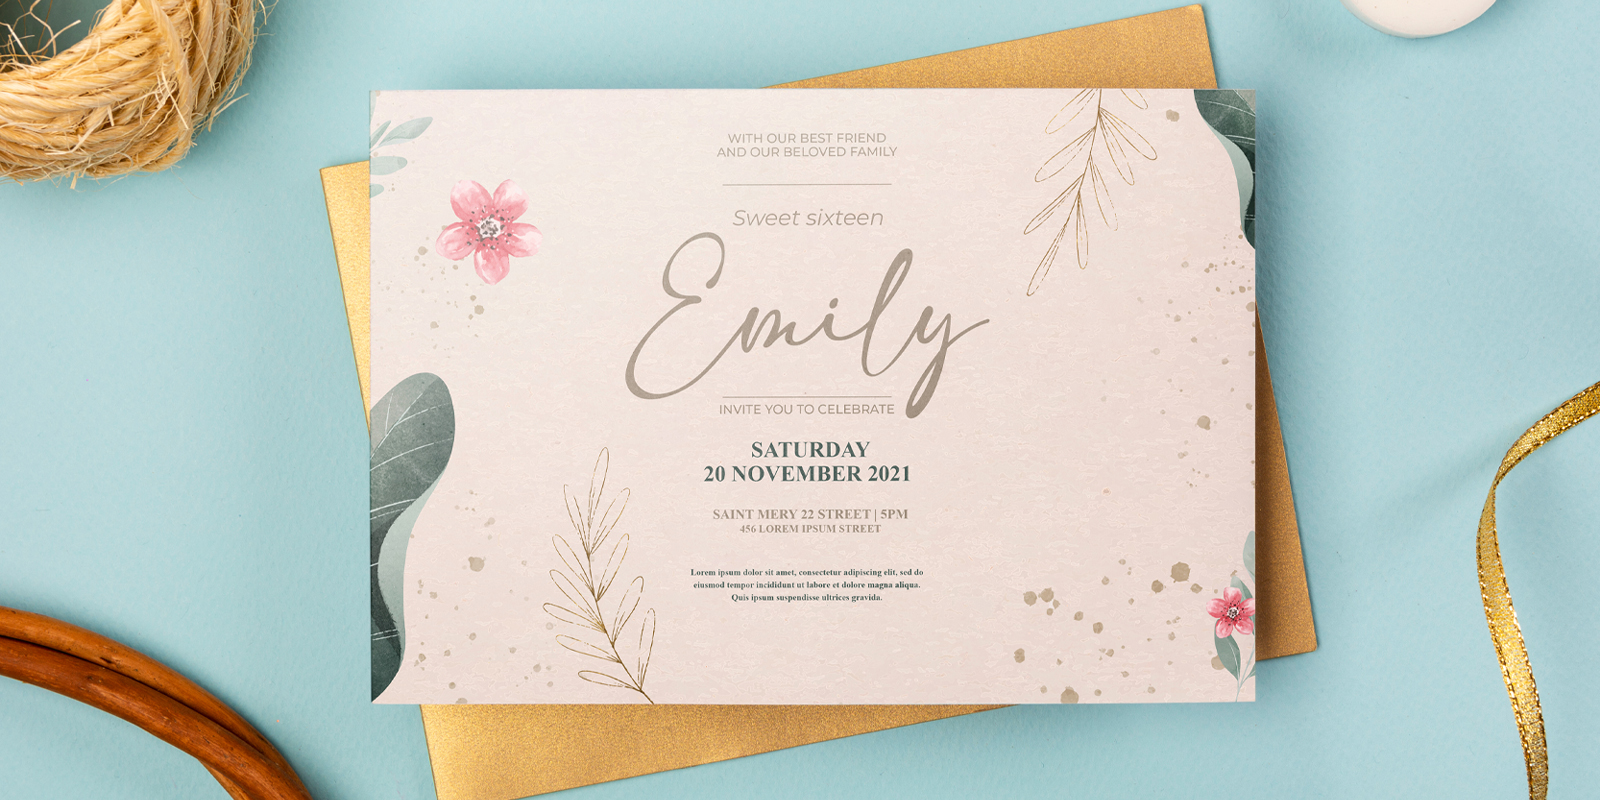 Invitations in Rockhampton - Print with Pagerr